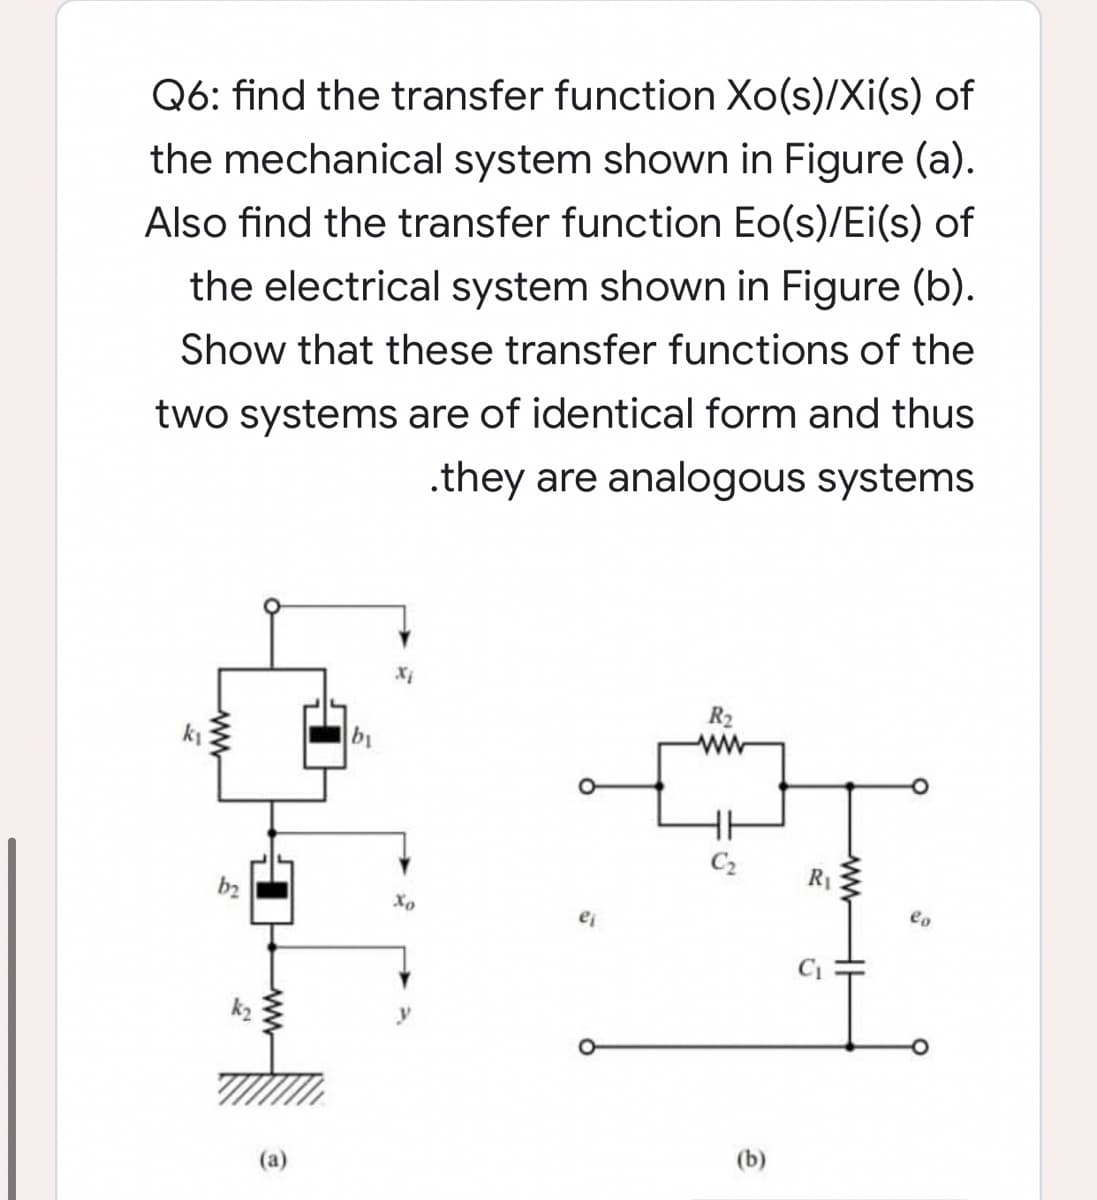 Q6: find the transfer function Xo(s)/Xi(s) of
the mechanical system shown in Figure (a).
Also find the transfer function Eo(s)/Ei(s) of
the electrical system shown in Figure (b).
Show that these transfer functions of the
two systems are of identical form and thus
.they are analogous systems
R2
by
C2
eo
(b)
(a)
ww
ww-
bp
